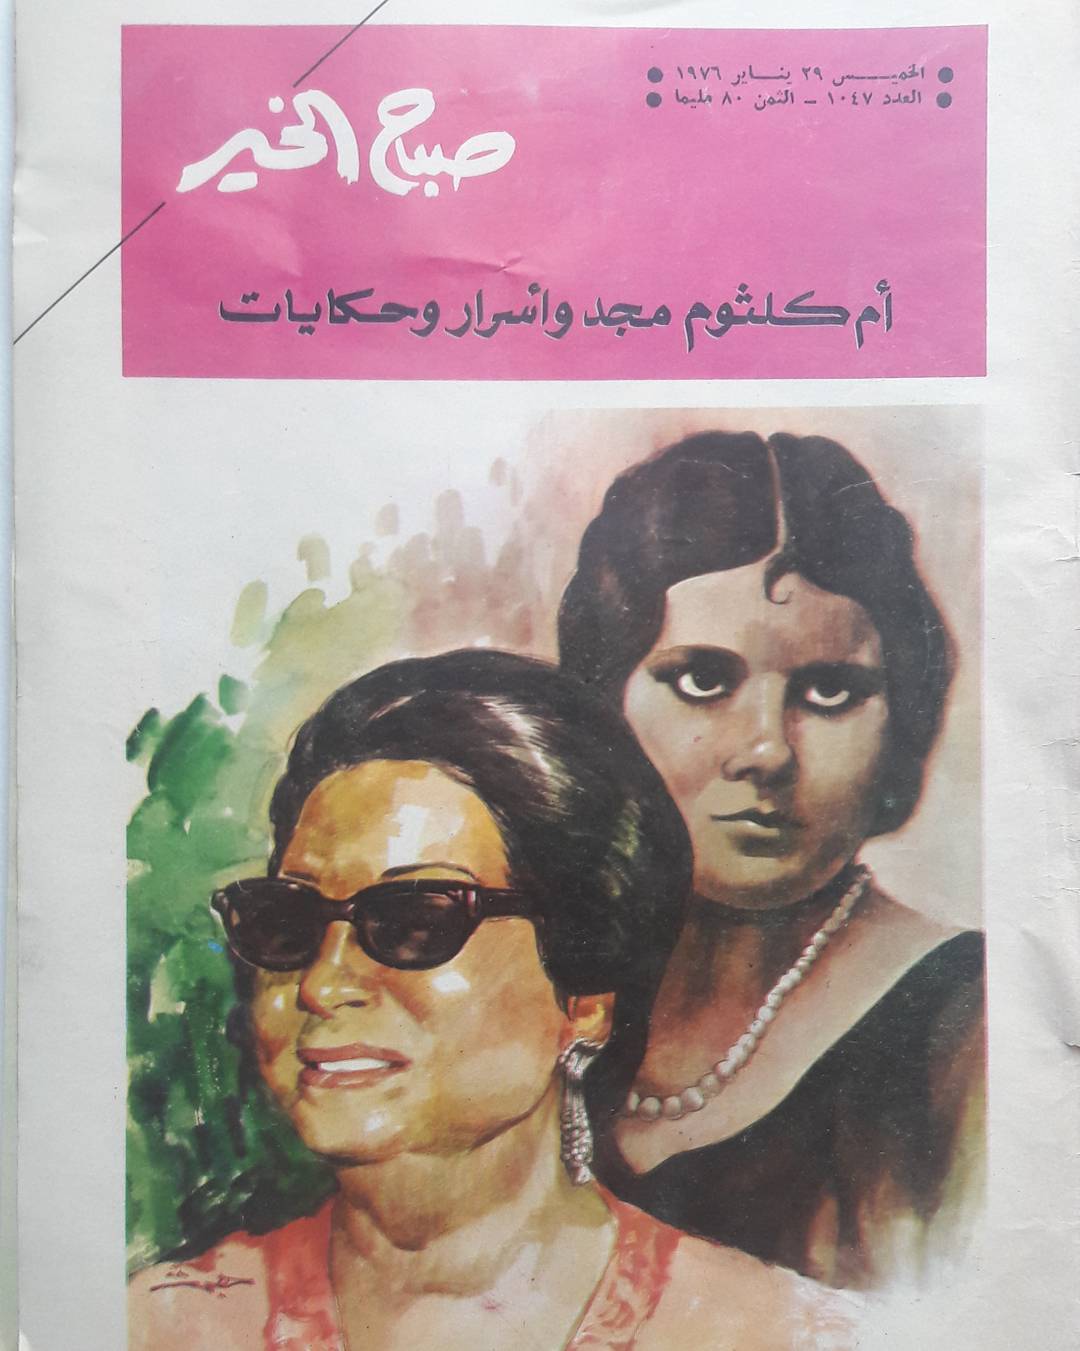 Sabah el kheir issue from 1976